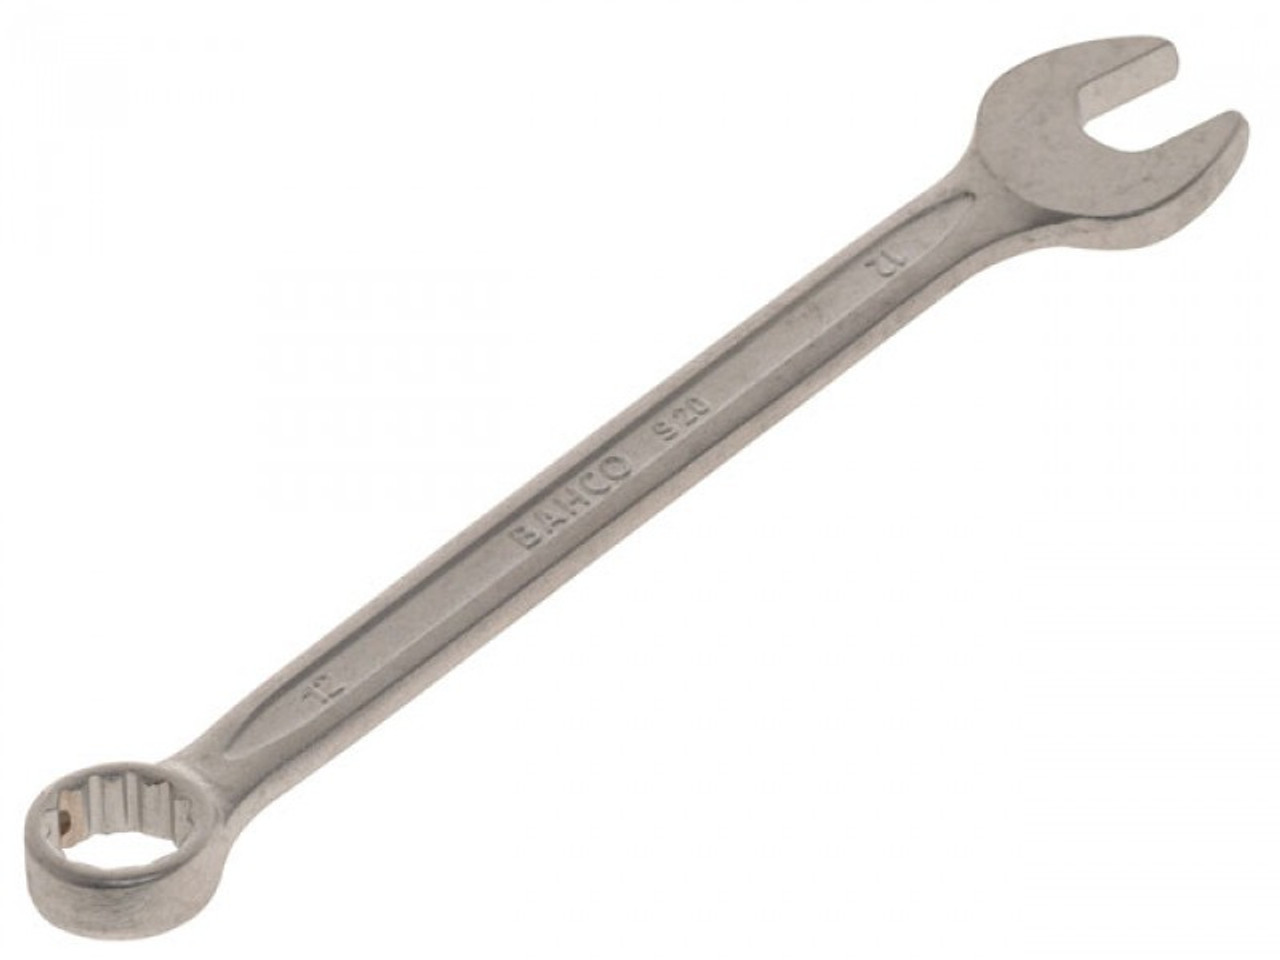 IMPA 616167 WRENCH OPEN & 12-POINT BOX BAHCO PU 1/4 1/4"